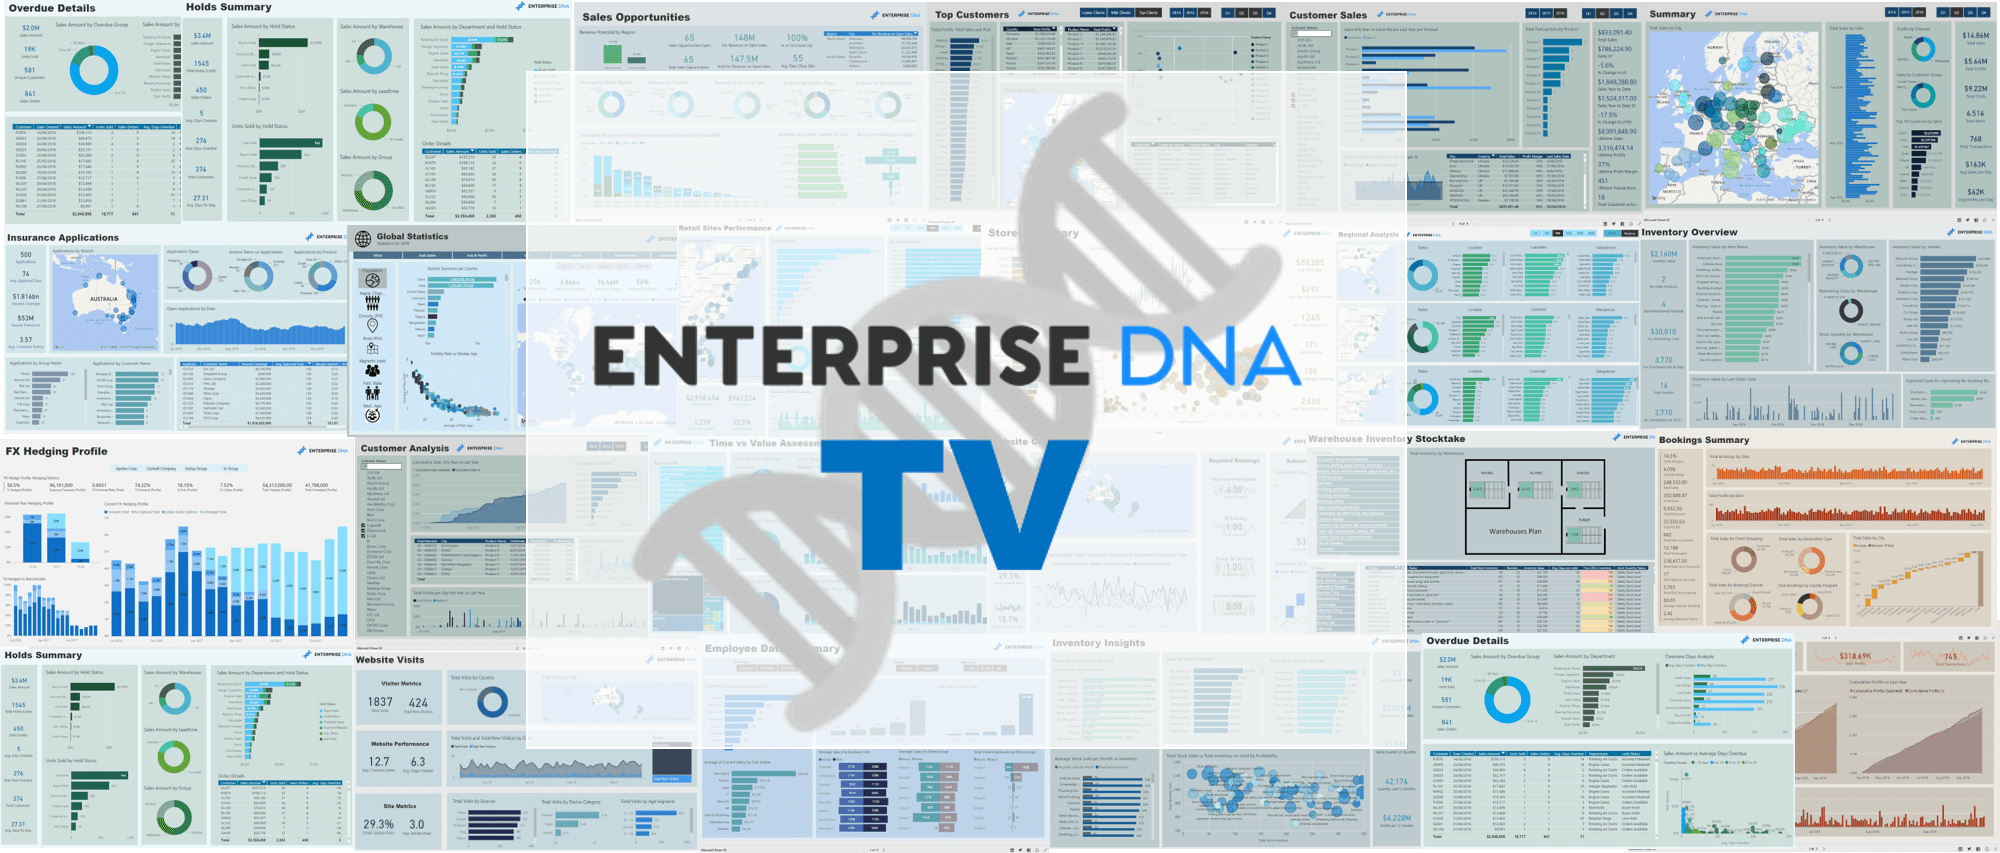 30 for 30. 30 videos in 30 days. Youtube channel launch for Enterprise DNA TV!